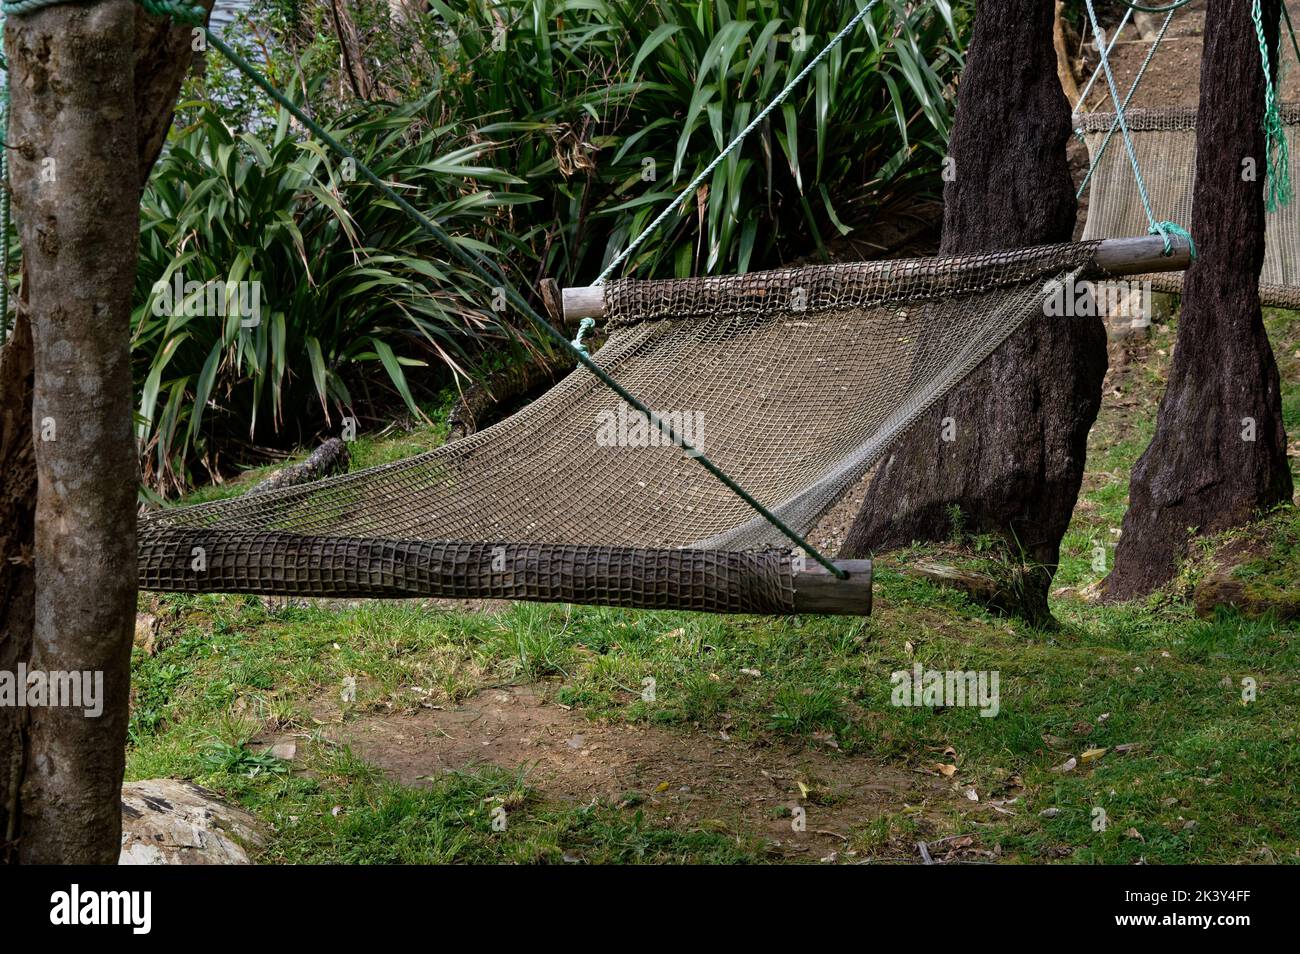 An empty hammock hangs between trees, a welcome resting spot Stock Photo